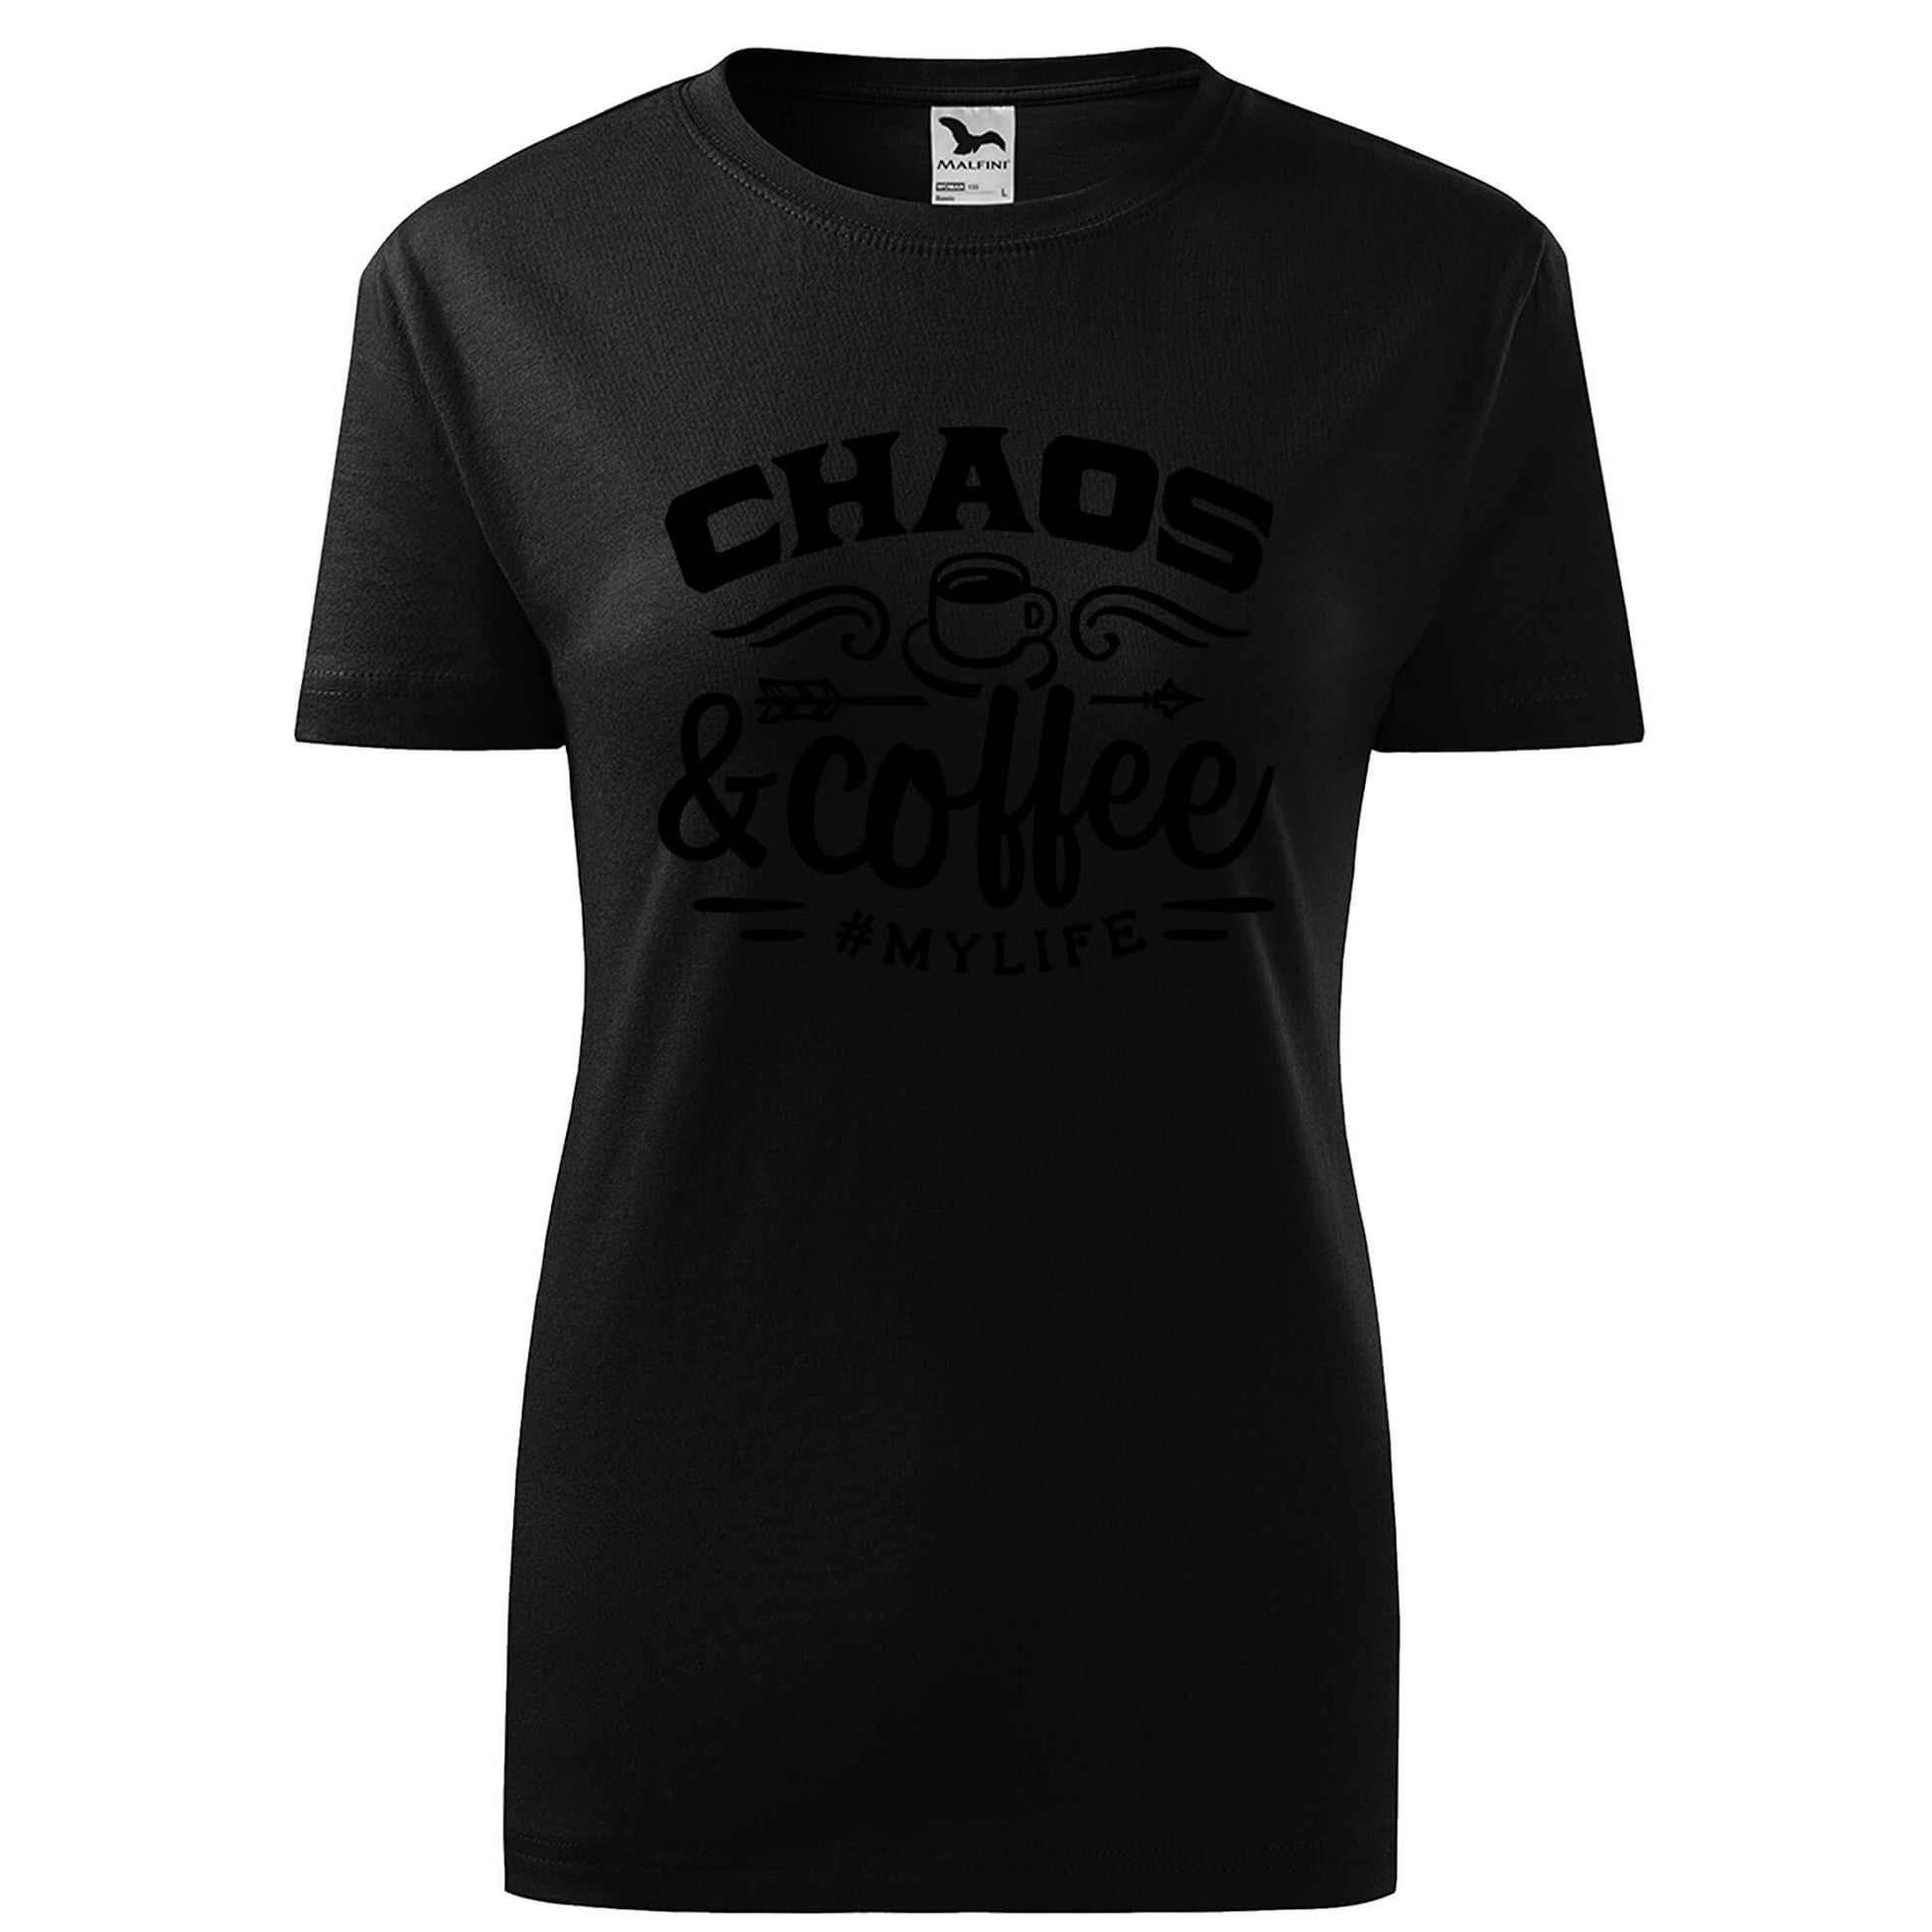 Chaos and coffee t-shirt - rvdesignprint